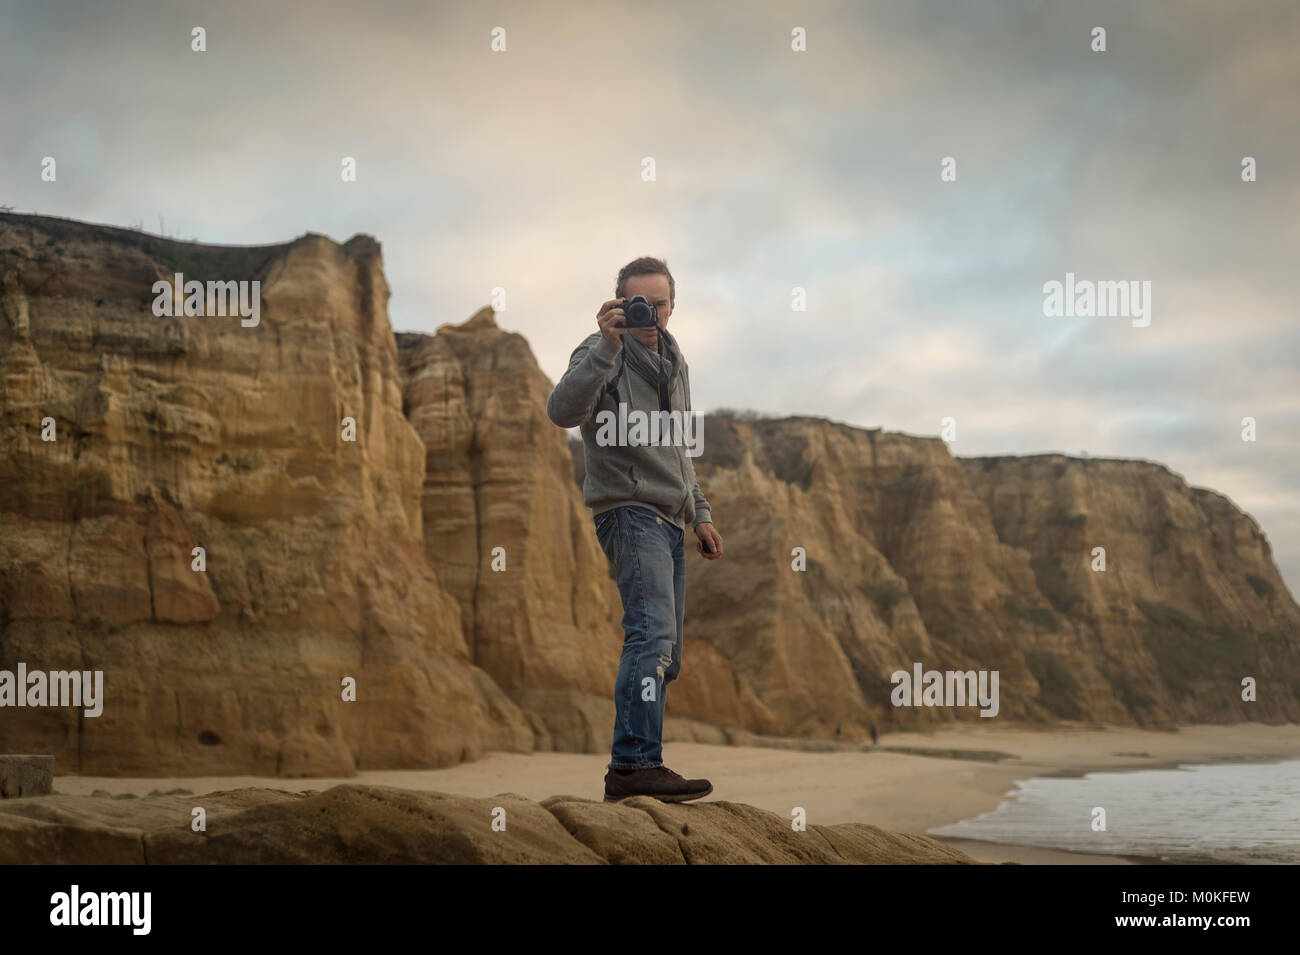 man standing on rocks by rugged coastline taking a photo. Stock Photo